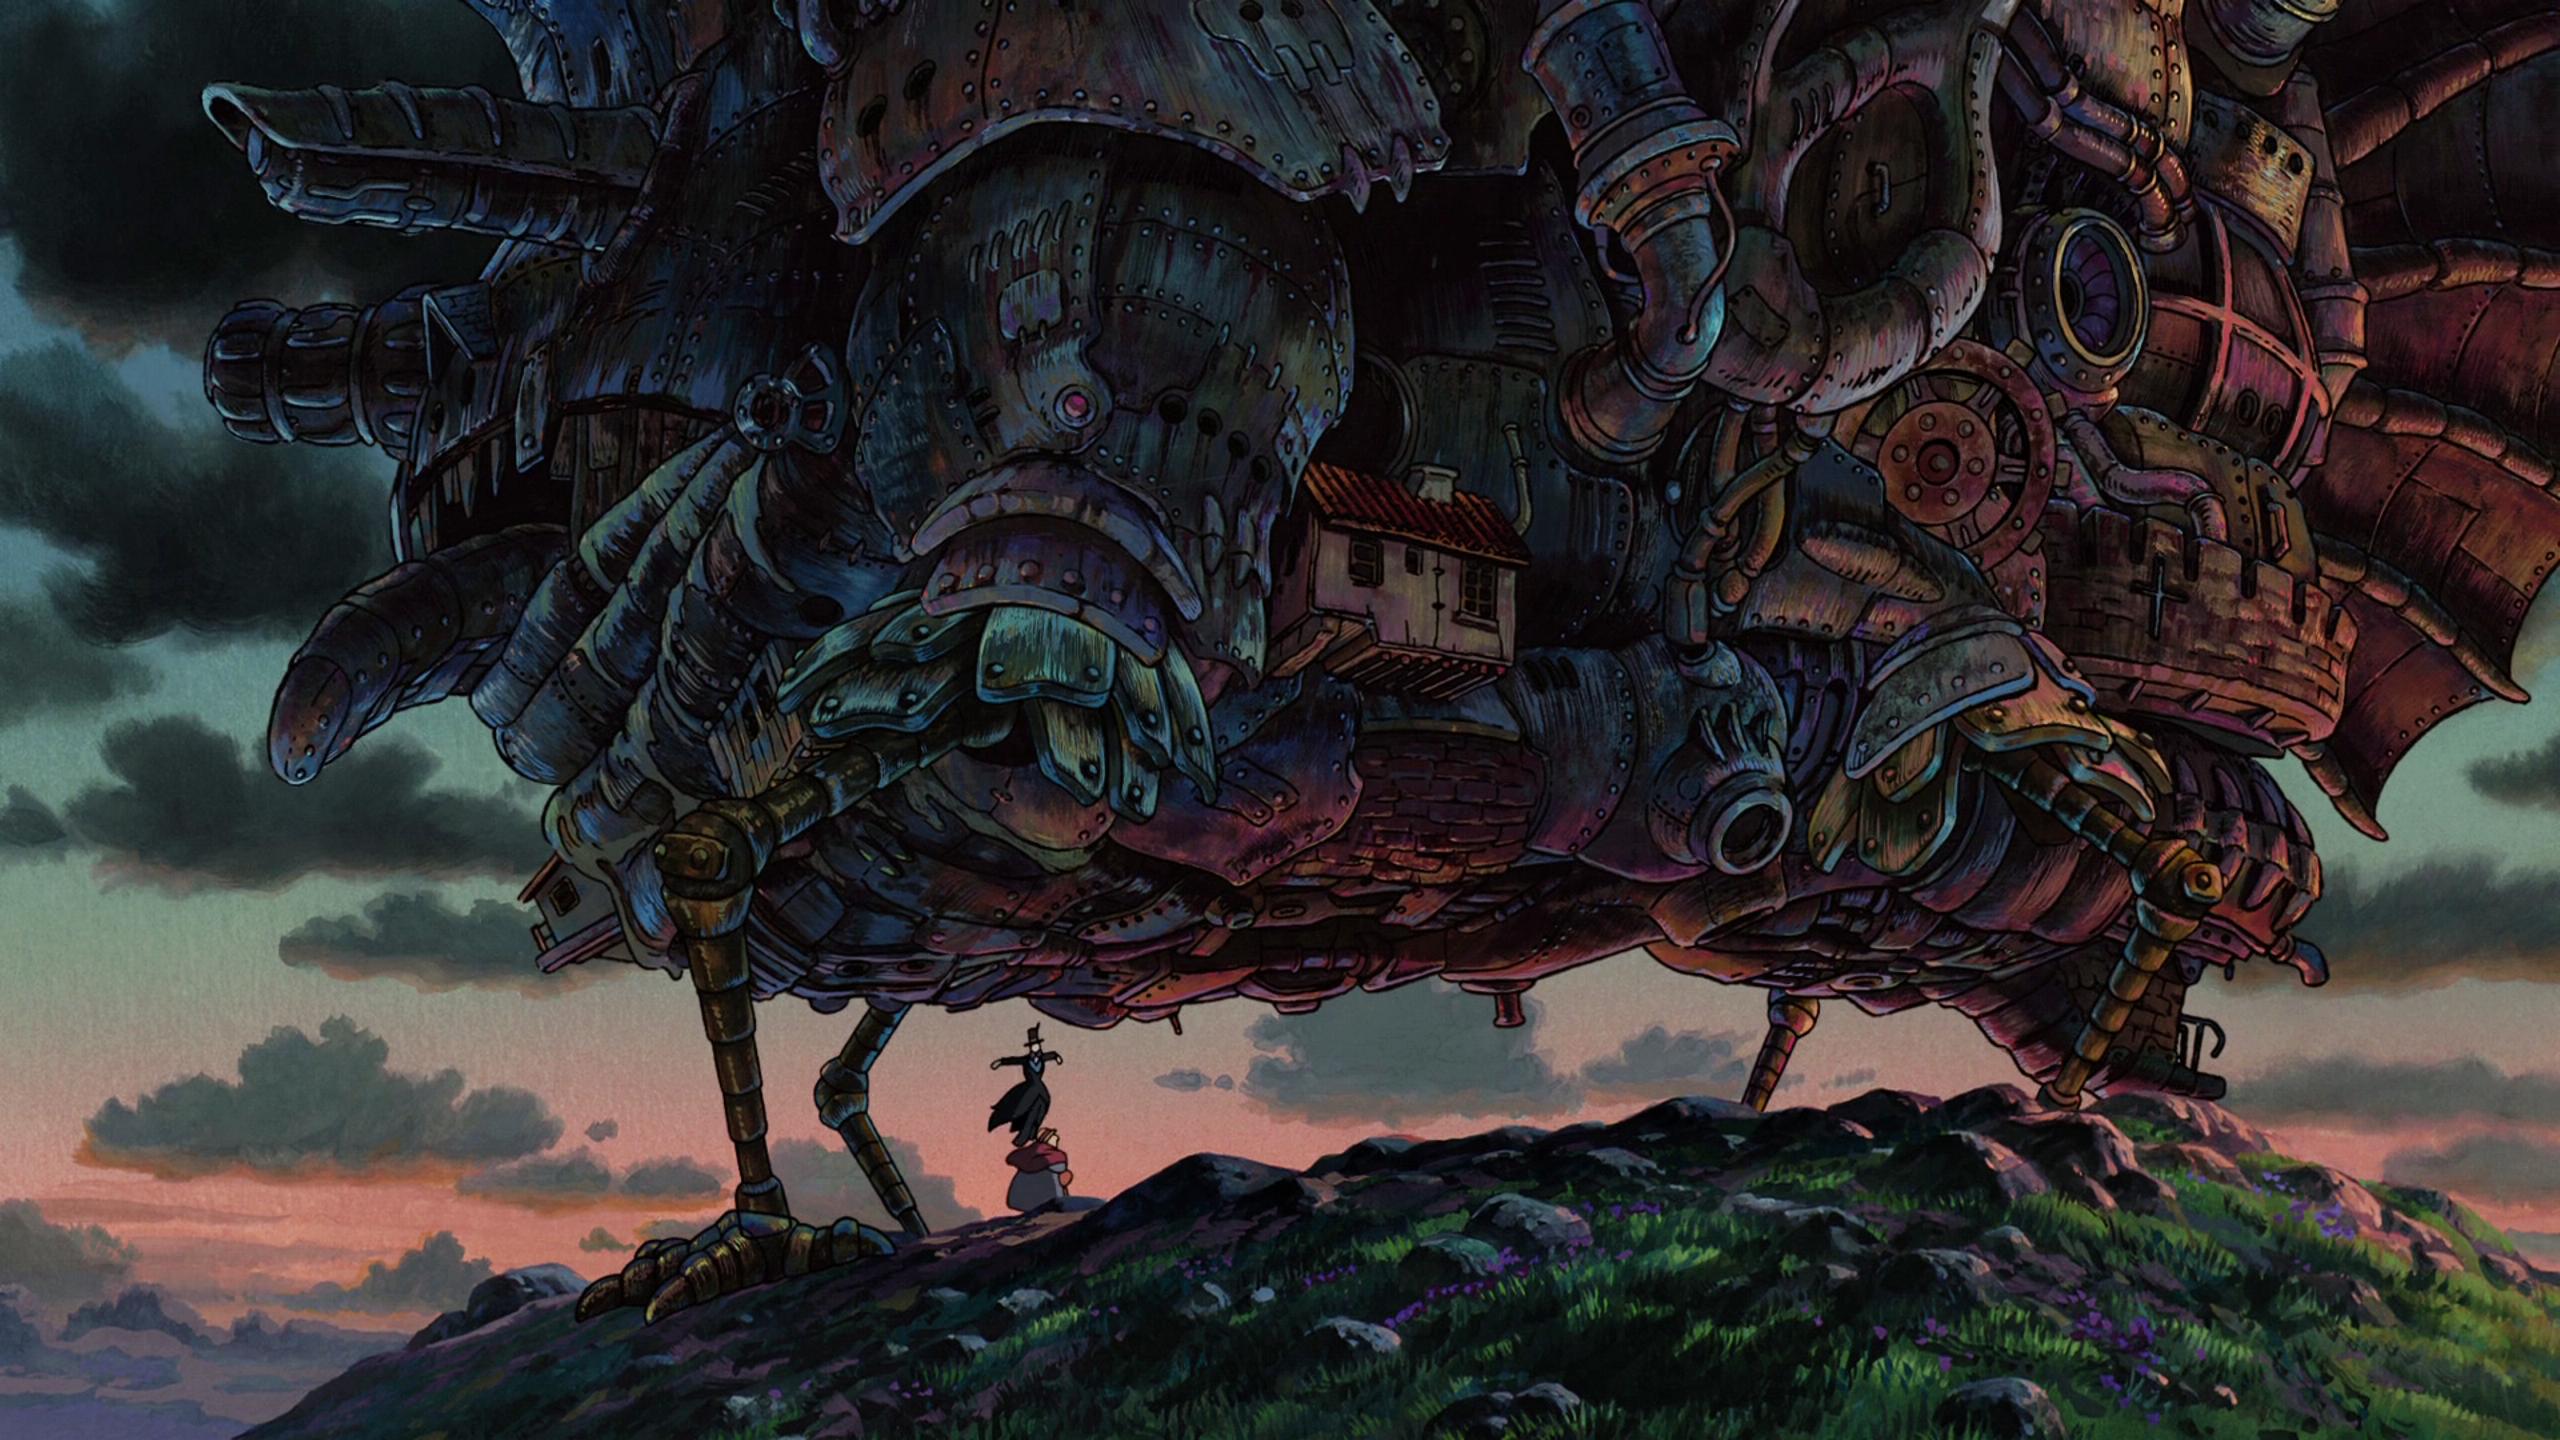 Gorgeous Studio Ghibli Wallpapers   Off Topic Discussion